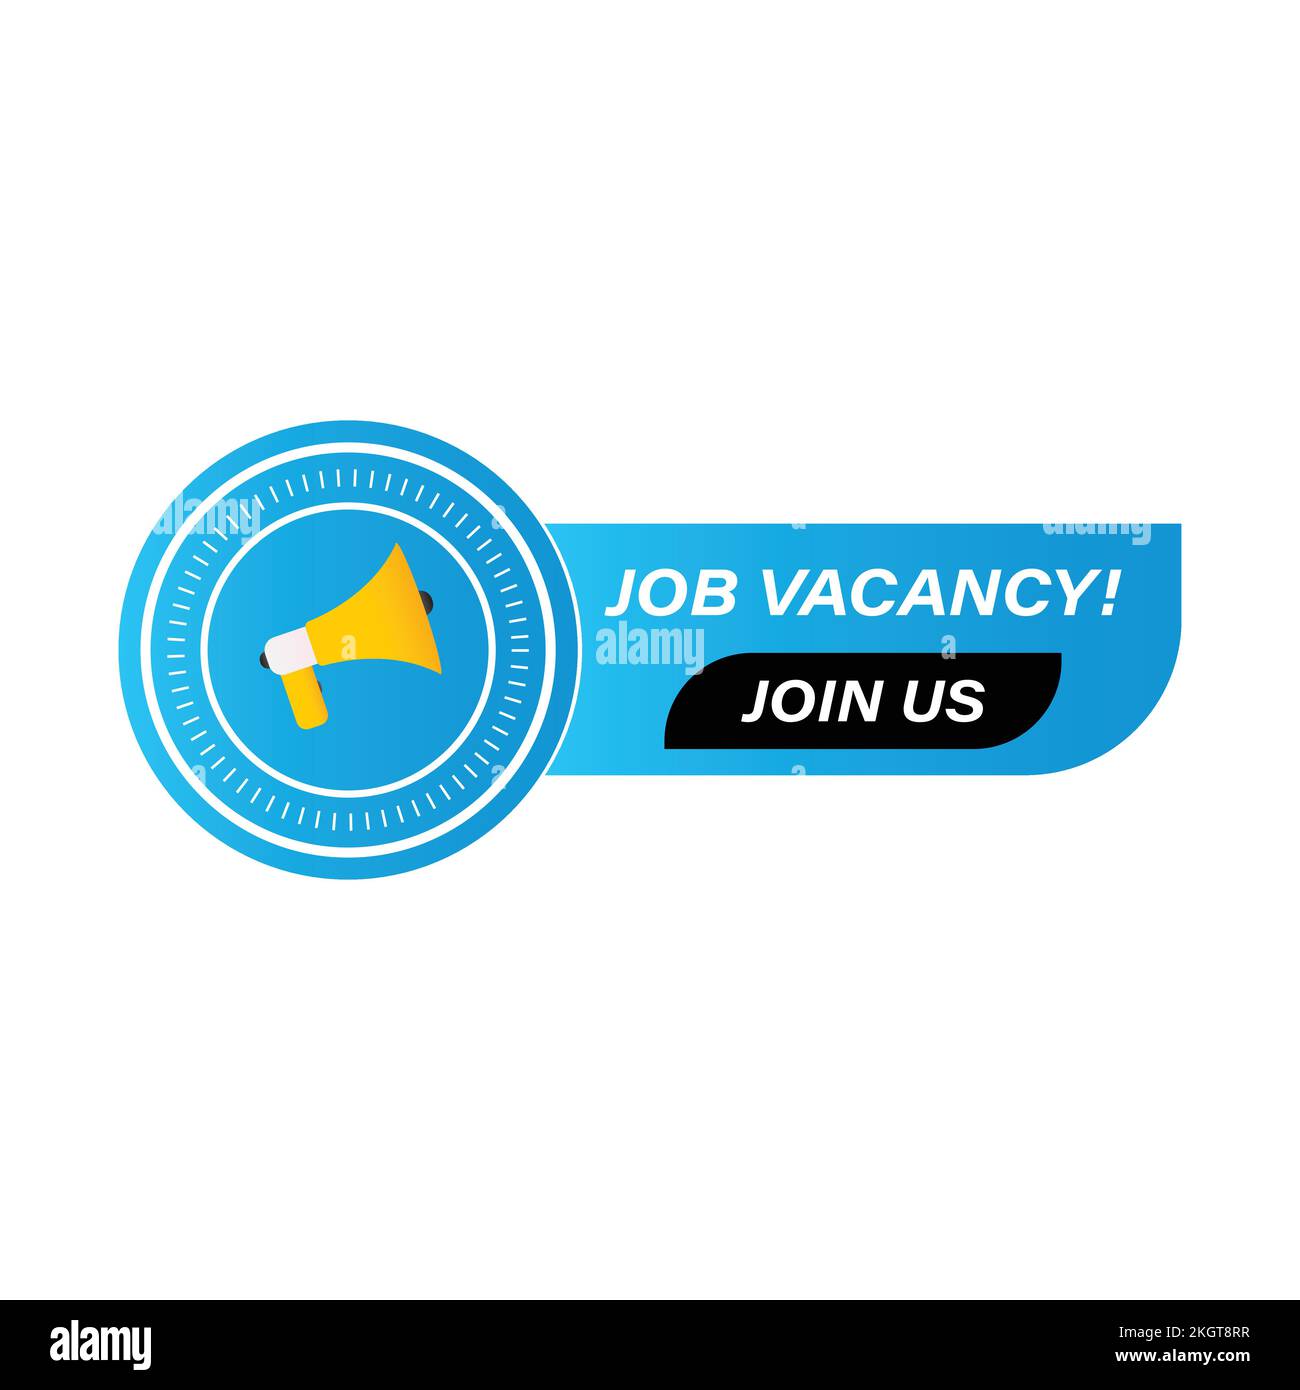 Job vacancy vector with blue color shade, hiring concept with mike speaker, join us inside the black shape, job vacancy hiring concept font design. Stock Vector